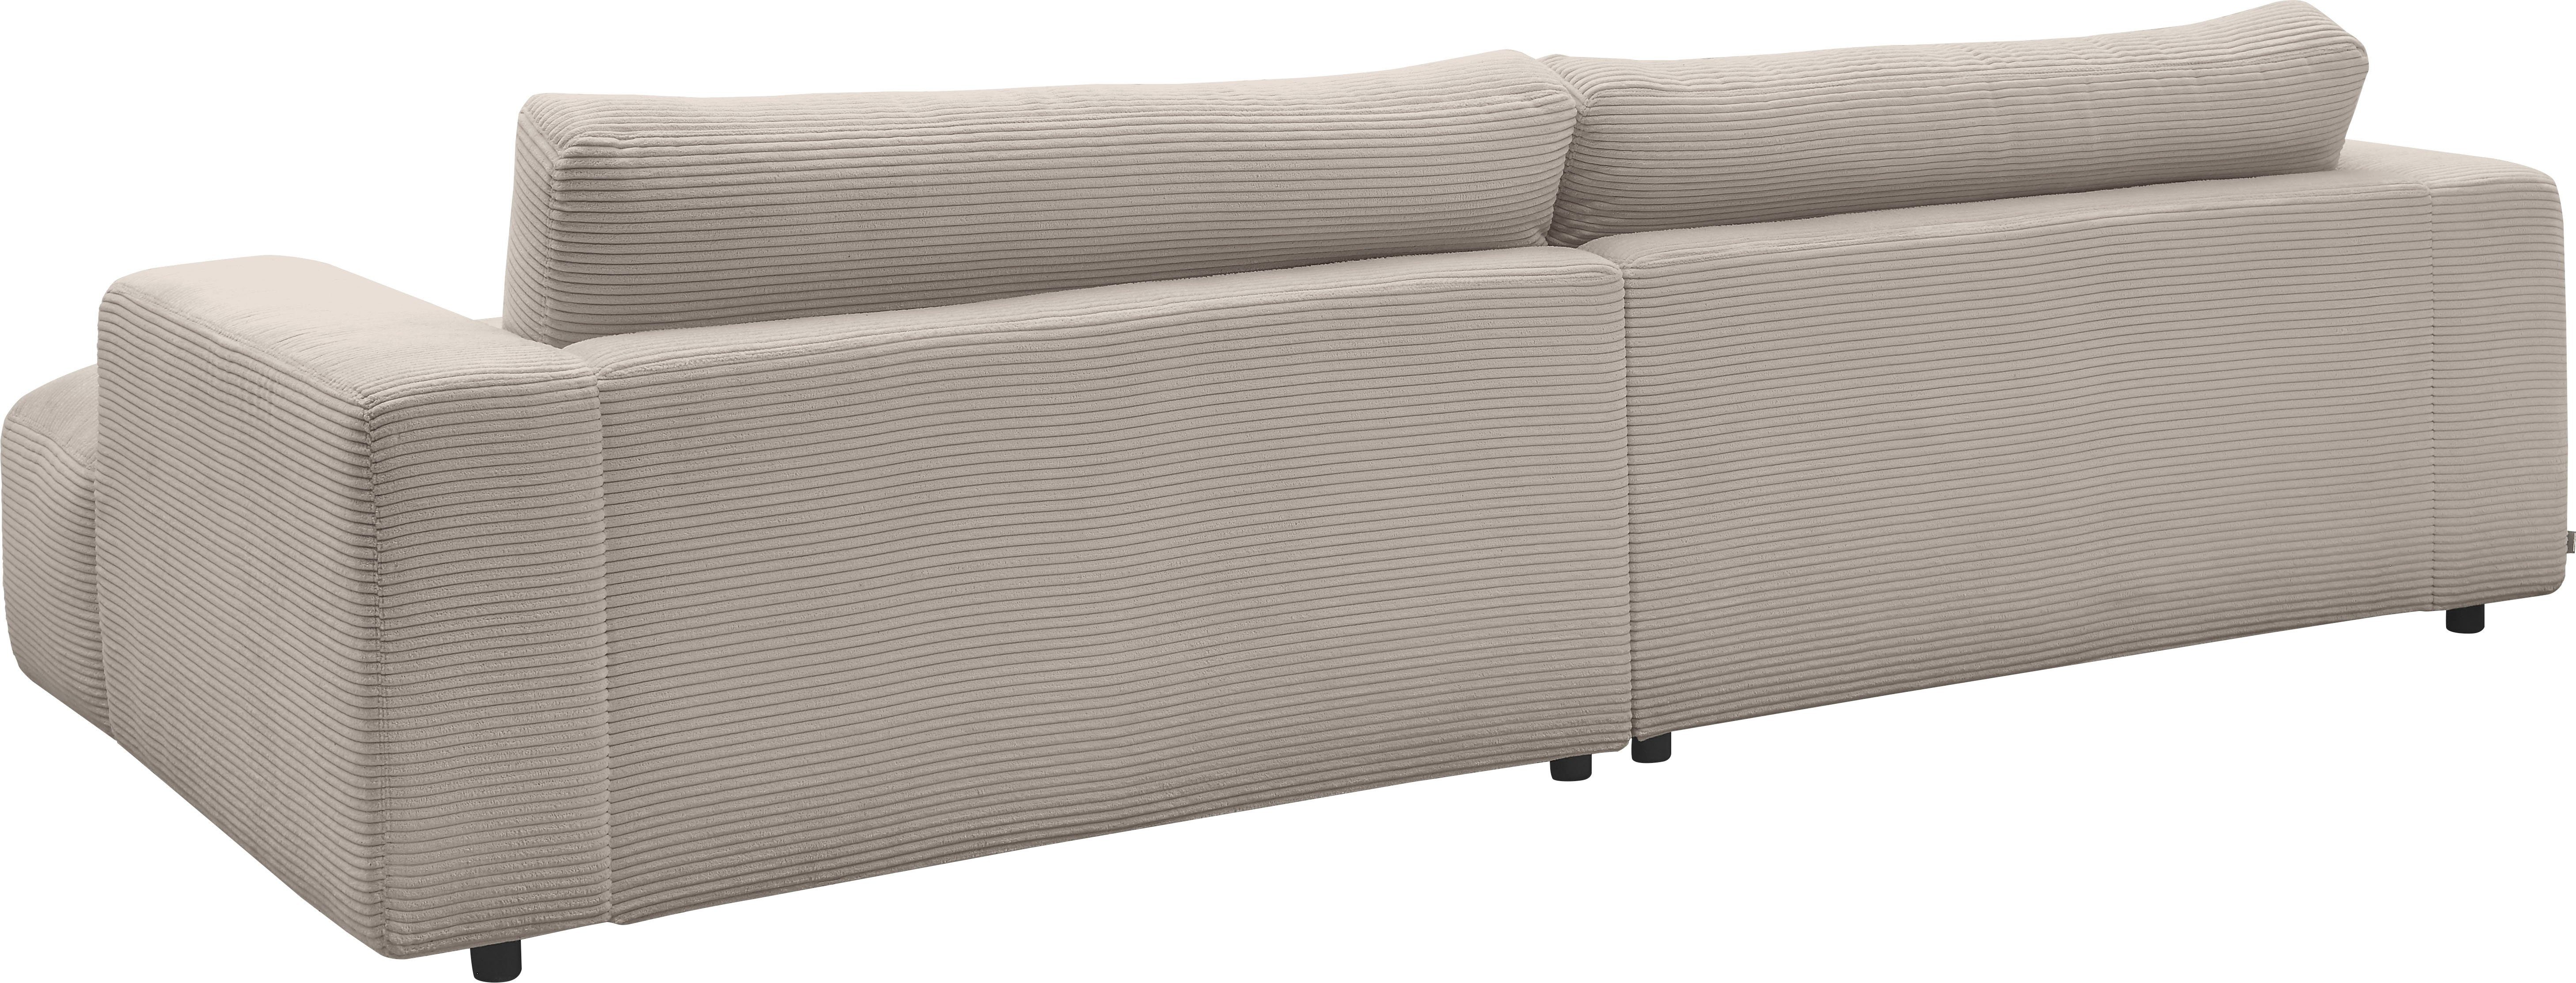 GALLERY Breite branded cm Cord-Bezug, M Loungesofa Lucia, by light-grey 292 Musterring